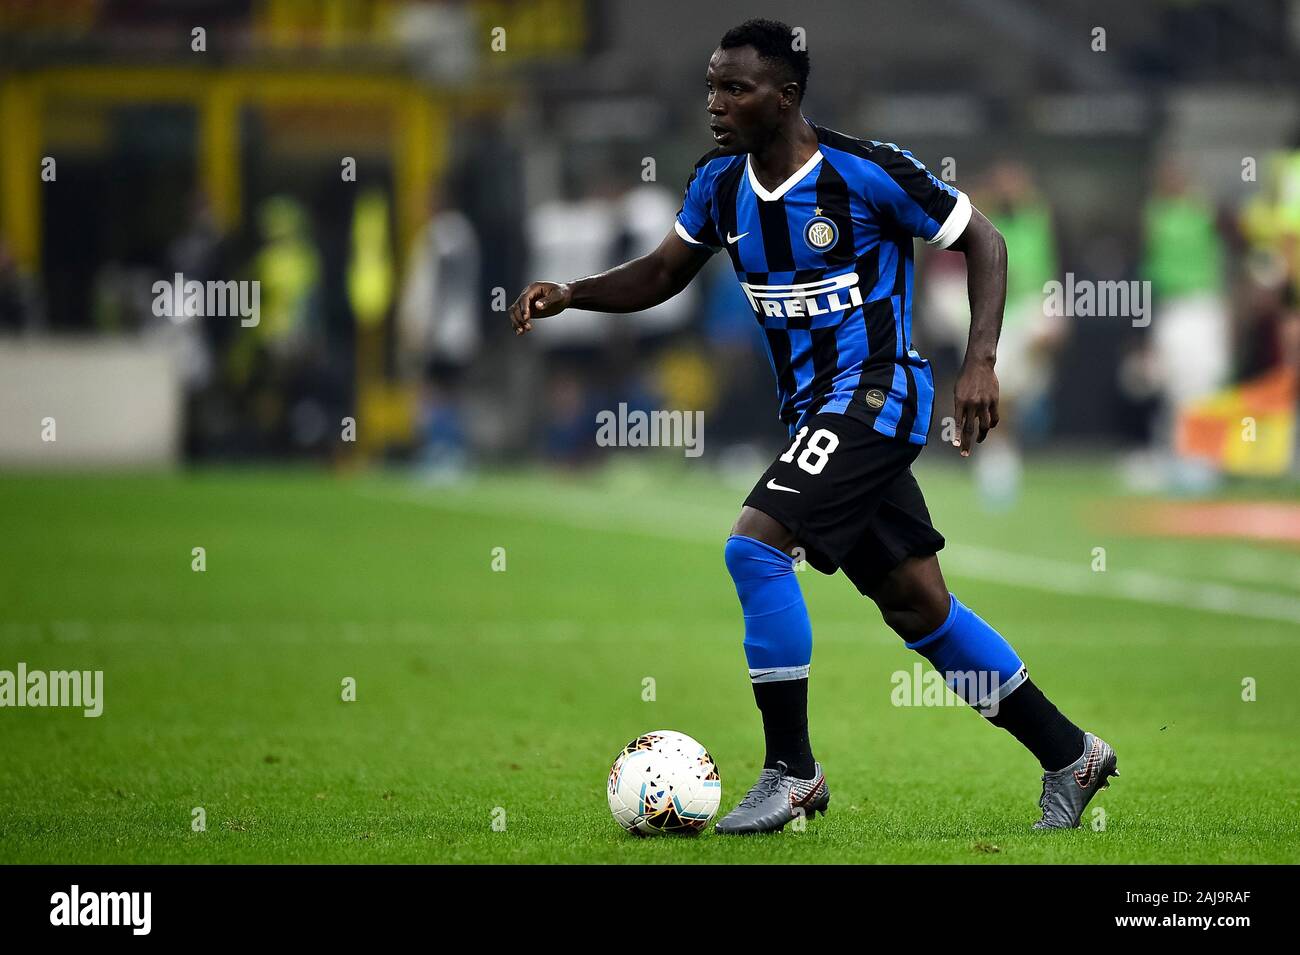 Milan, Italy. 21 September, 2019: Kwadwo Asamoah of FC Internazionale in action during the Serie A football match between AC Milan and FC Internazionale. FC Internazionale won 2-0 over AC Milan. Credit: Nicolò Campo/Alamy Live News Stock Photo